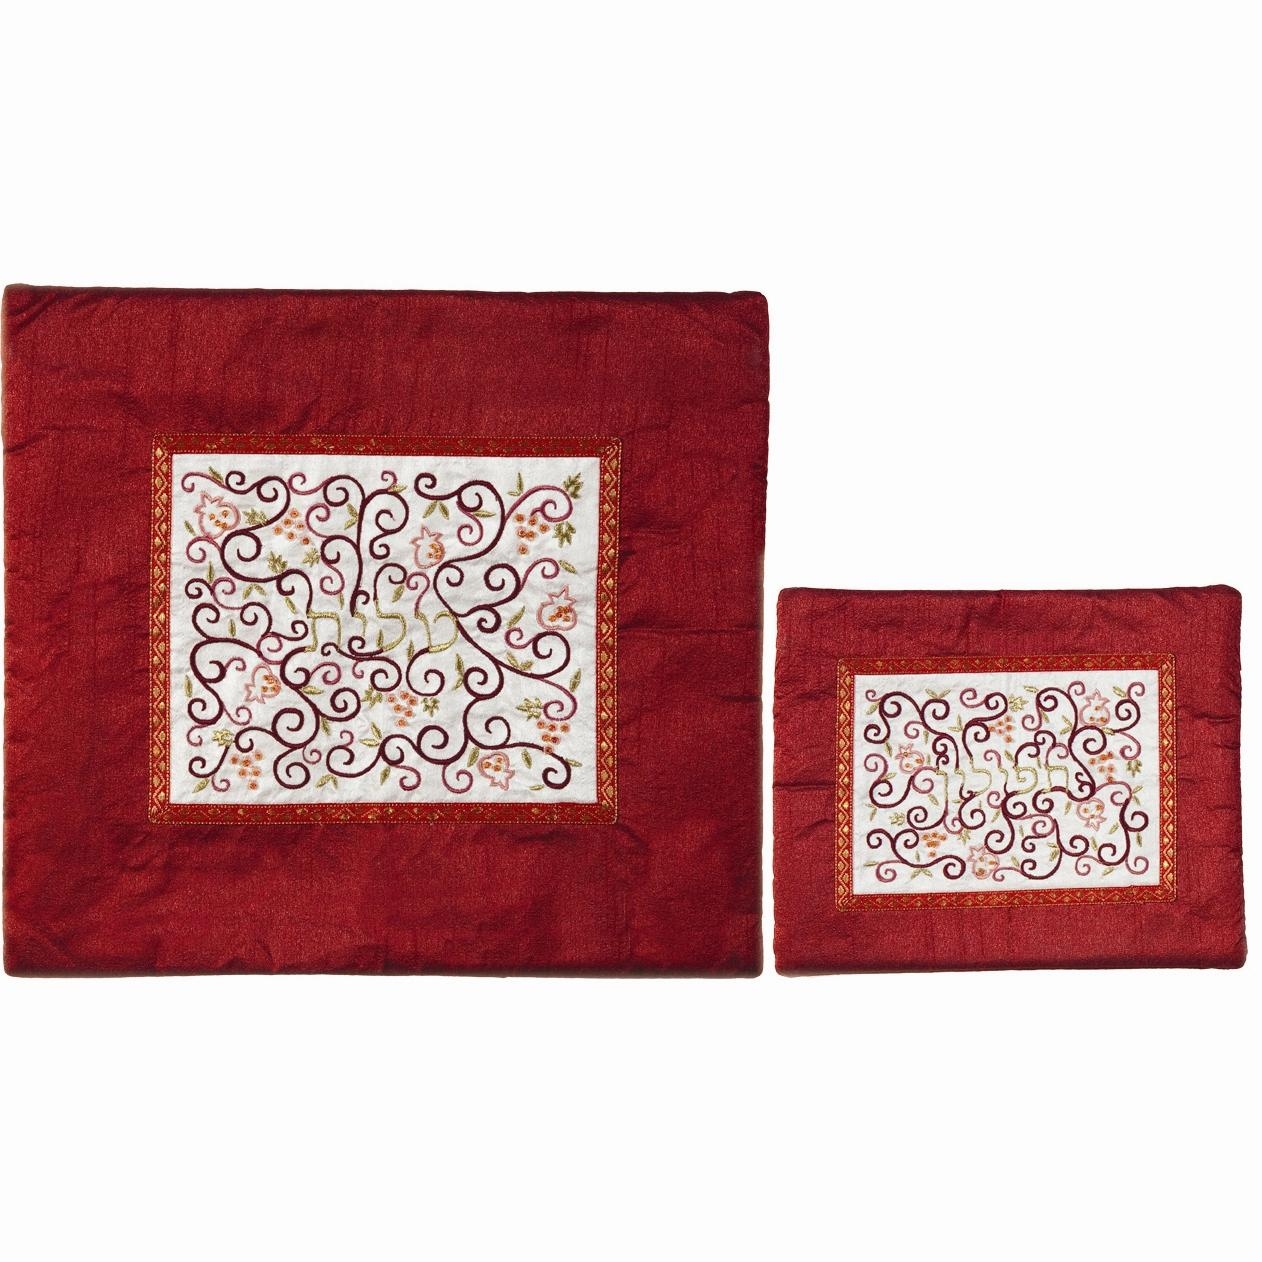 Yair Emanuel Embroidered Tallit and Tefillin Bag Set - Pomegranates (Red) - 1